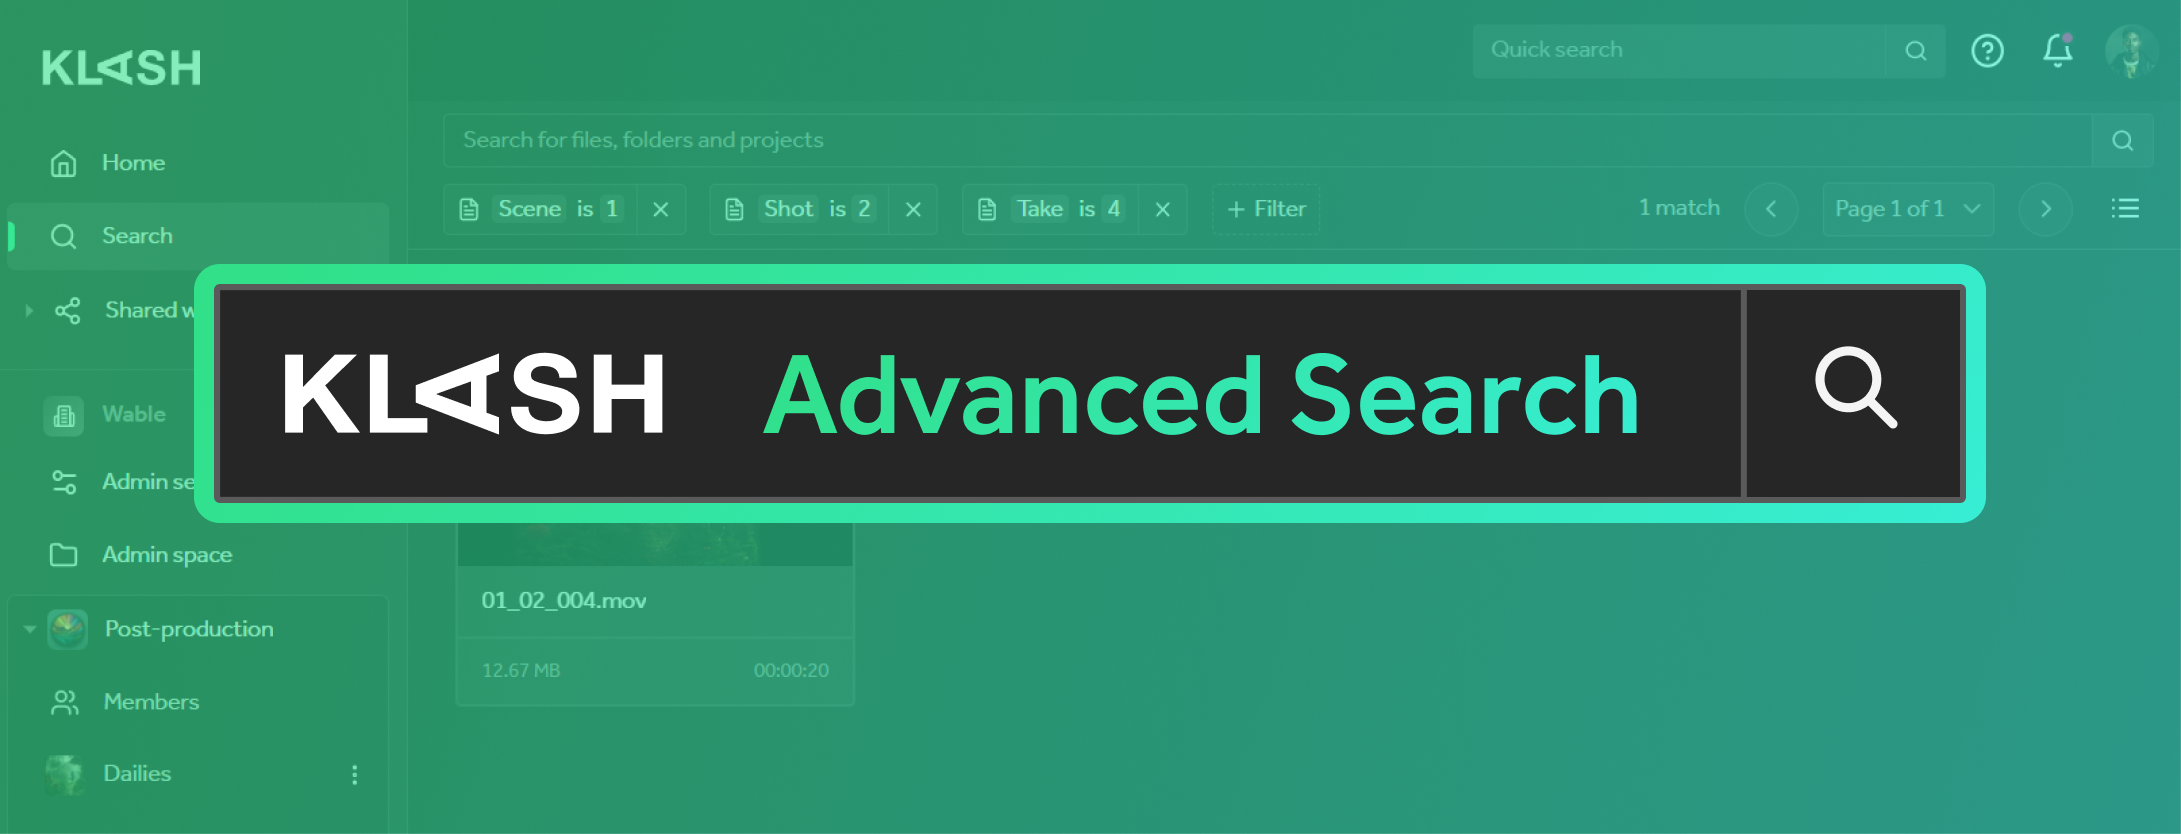 New Advanced Search Feature